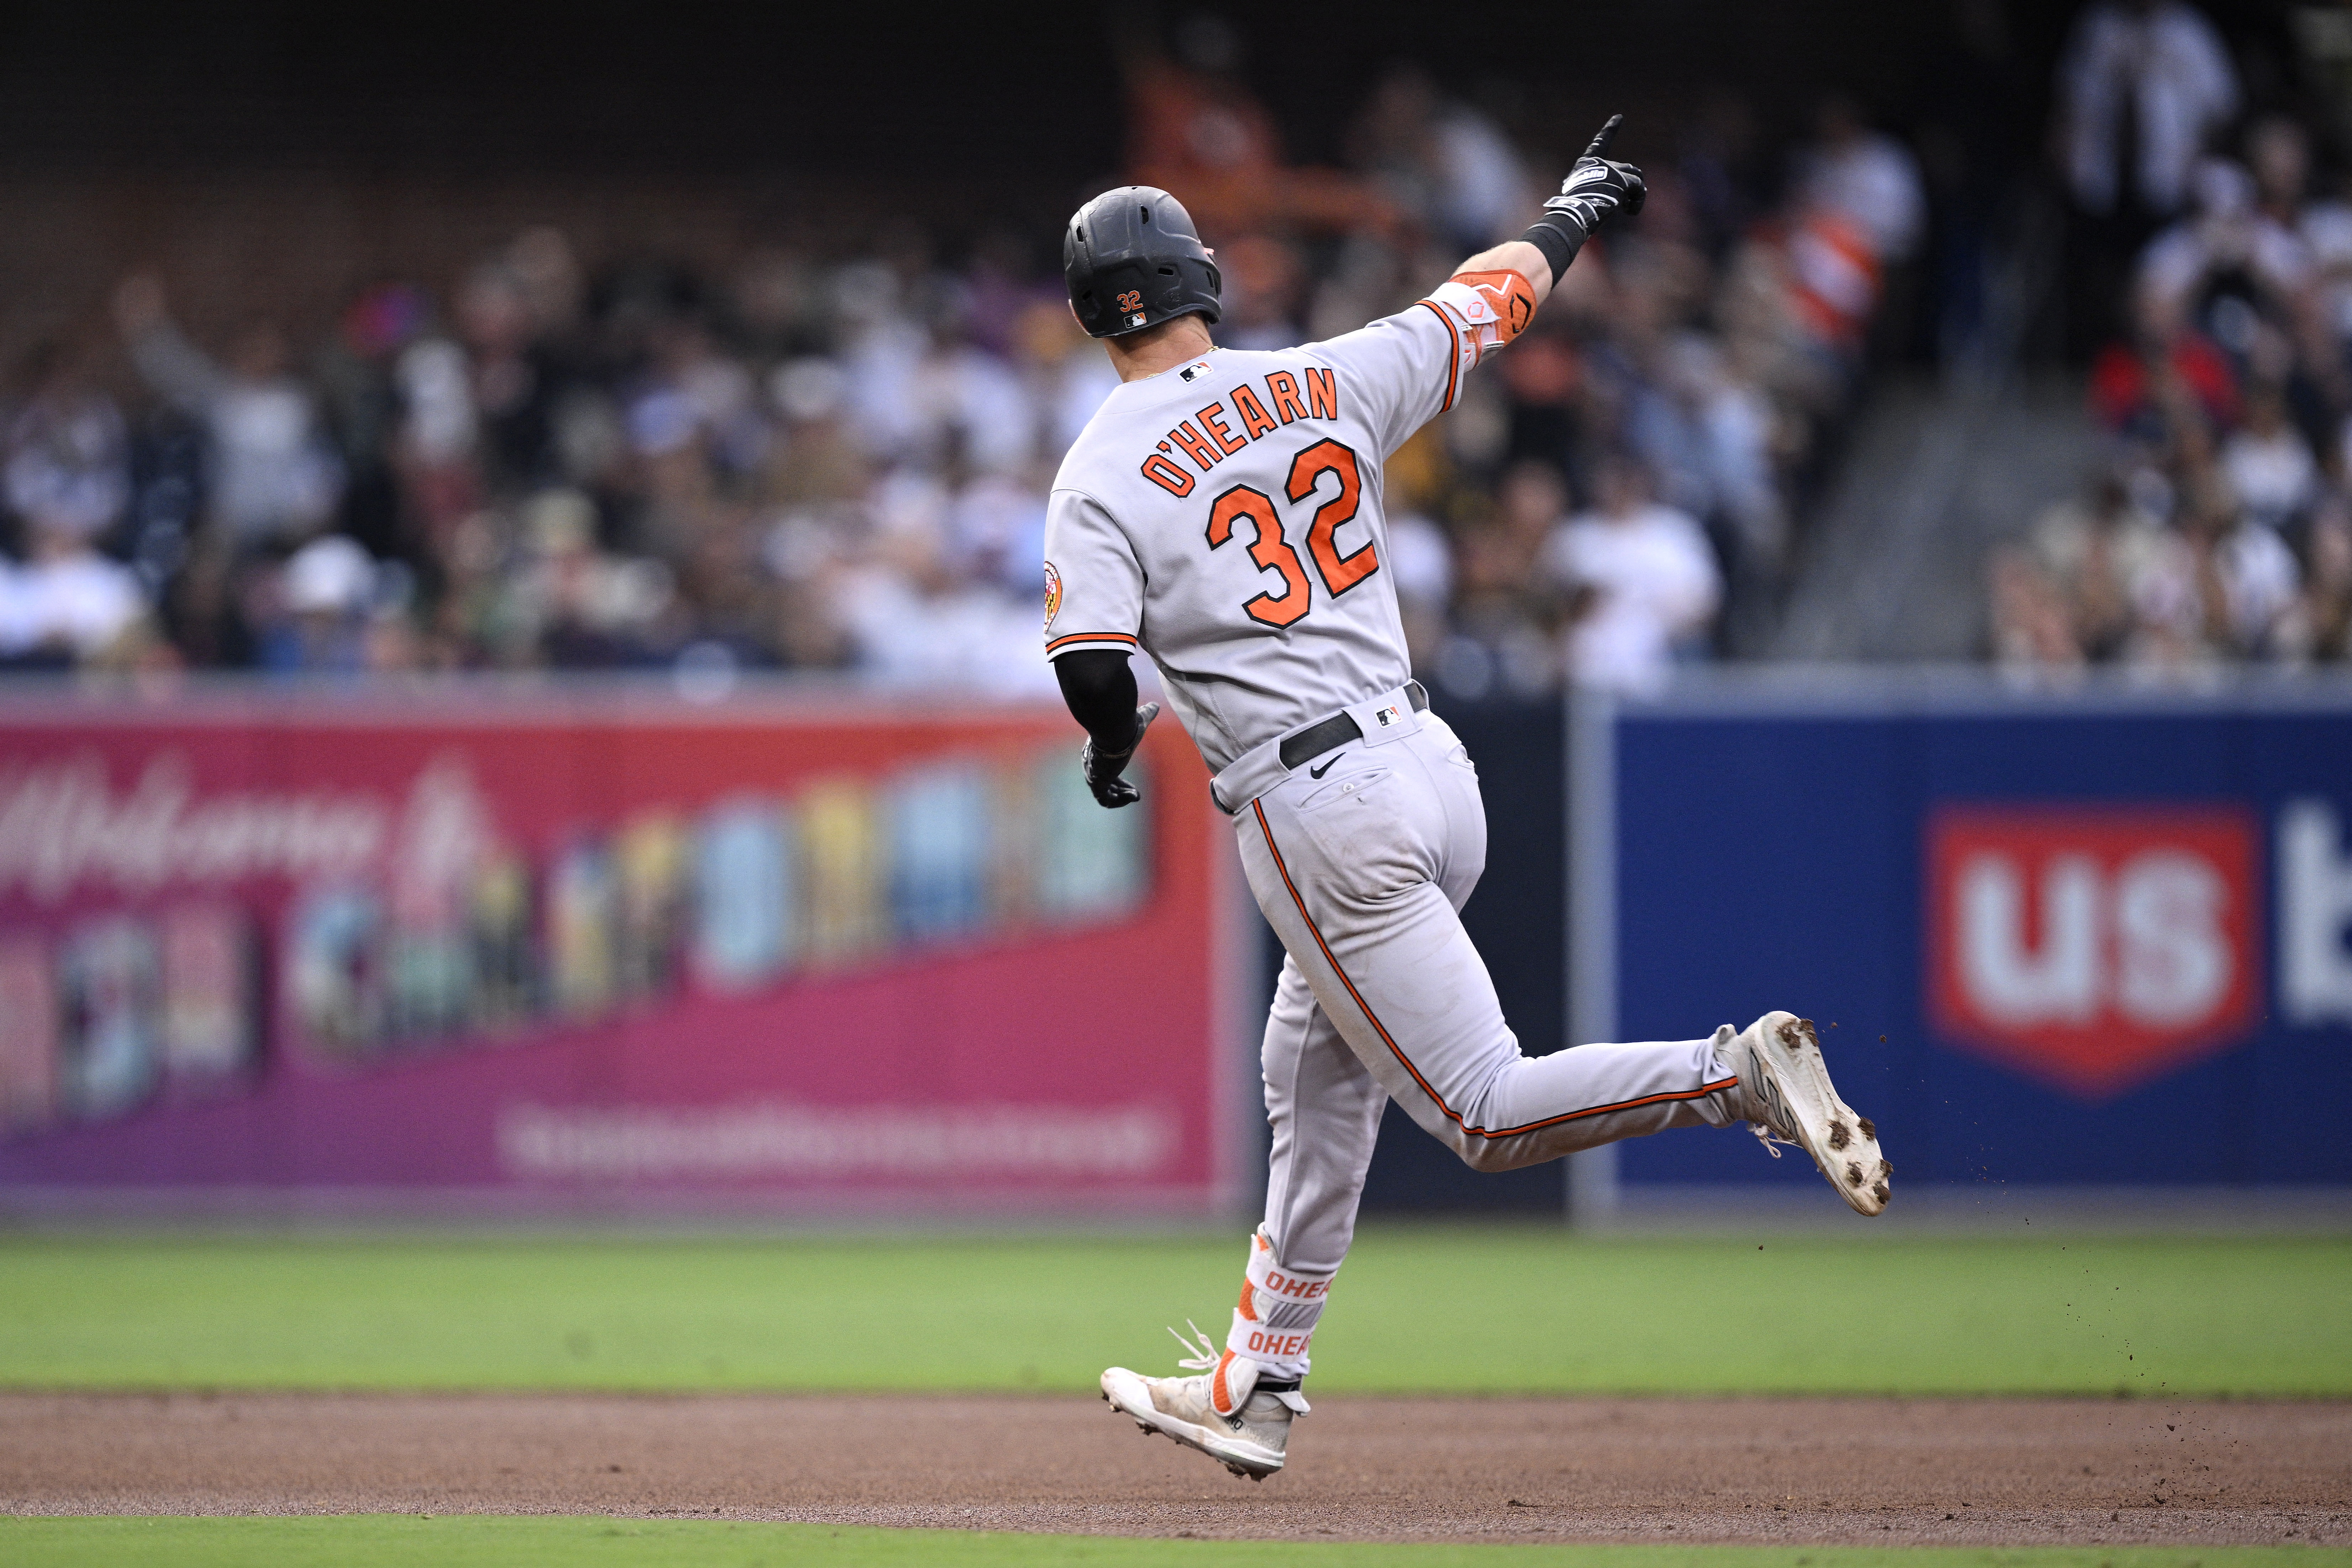 O's game blog: Orioles and Padres play the rubber match game tonight - Blog